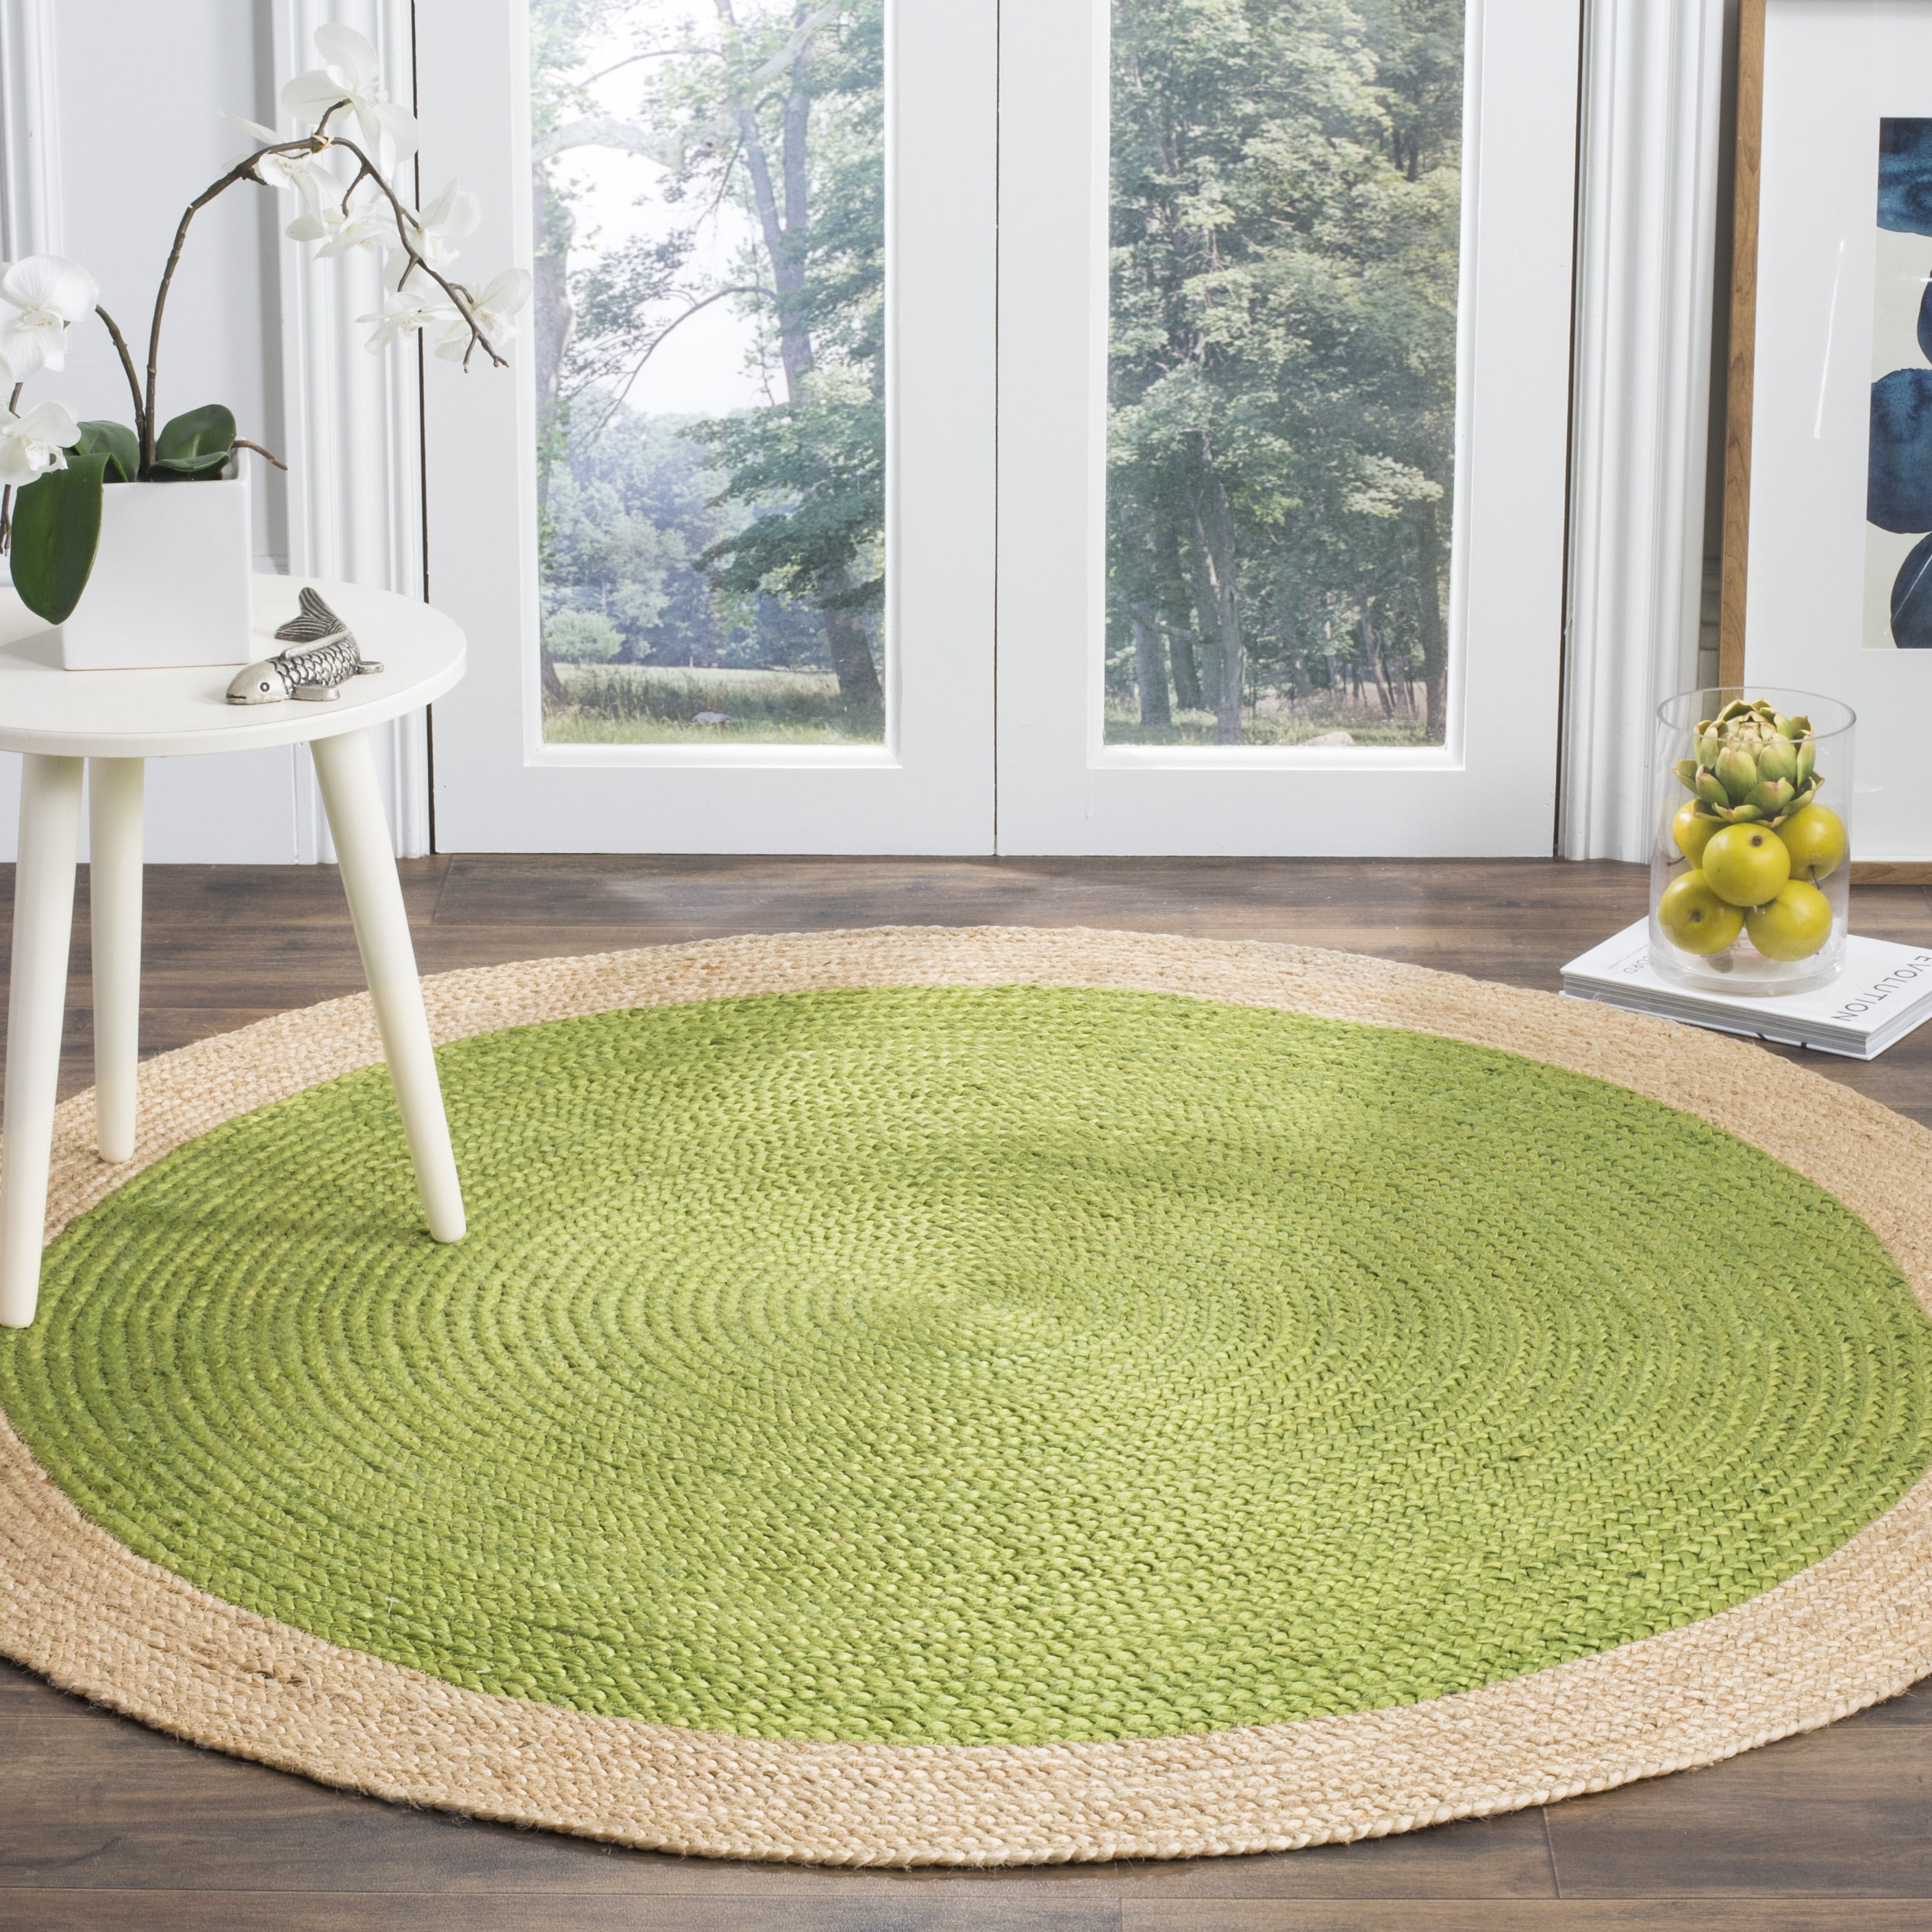 Details about   Indian handmade beautiful jute floor rugs with beige colourfull round 8x8 feet 